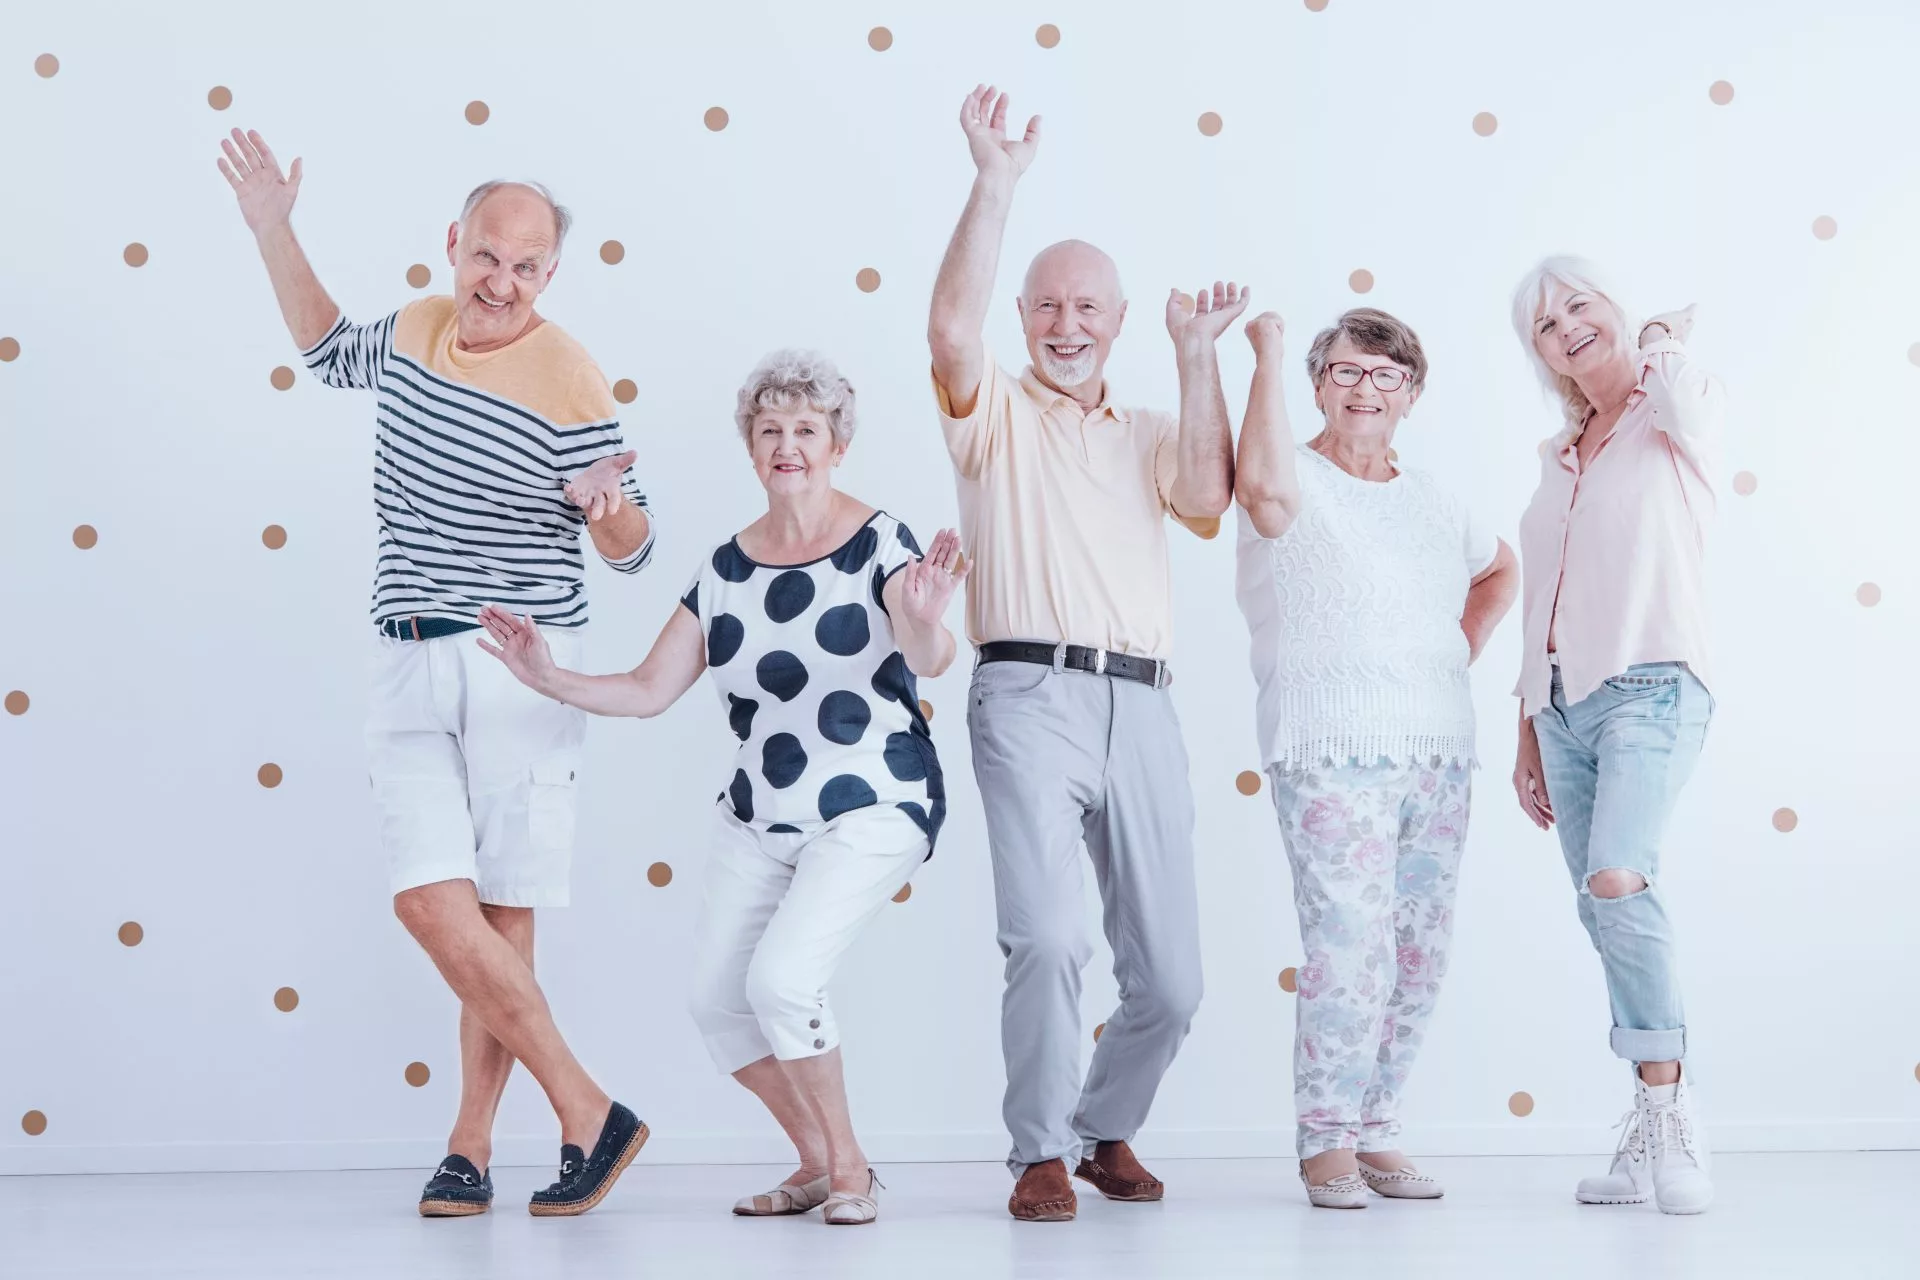 Happy senior people dancing against white background with gold dots